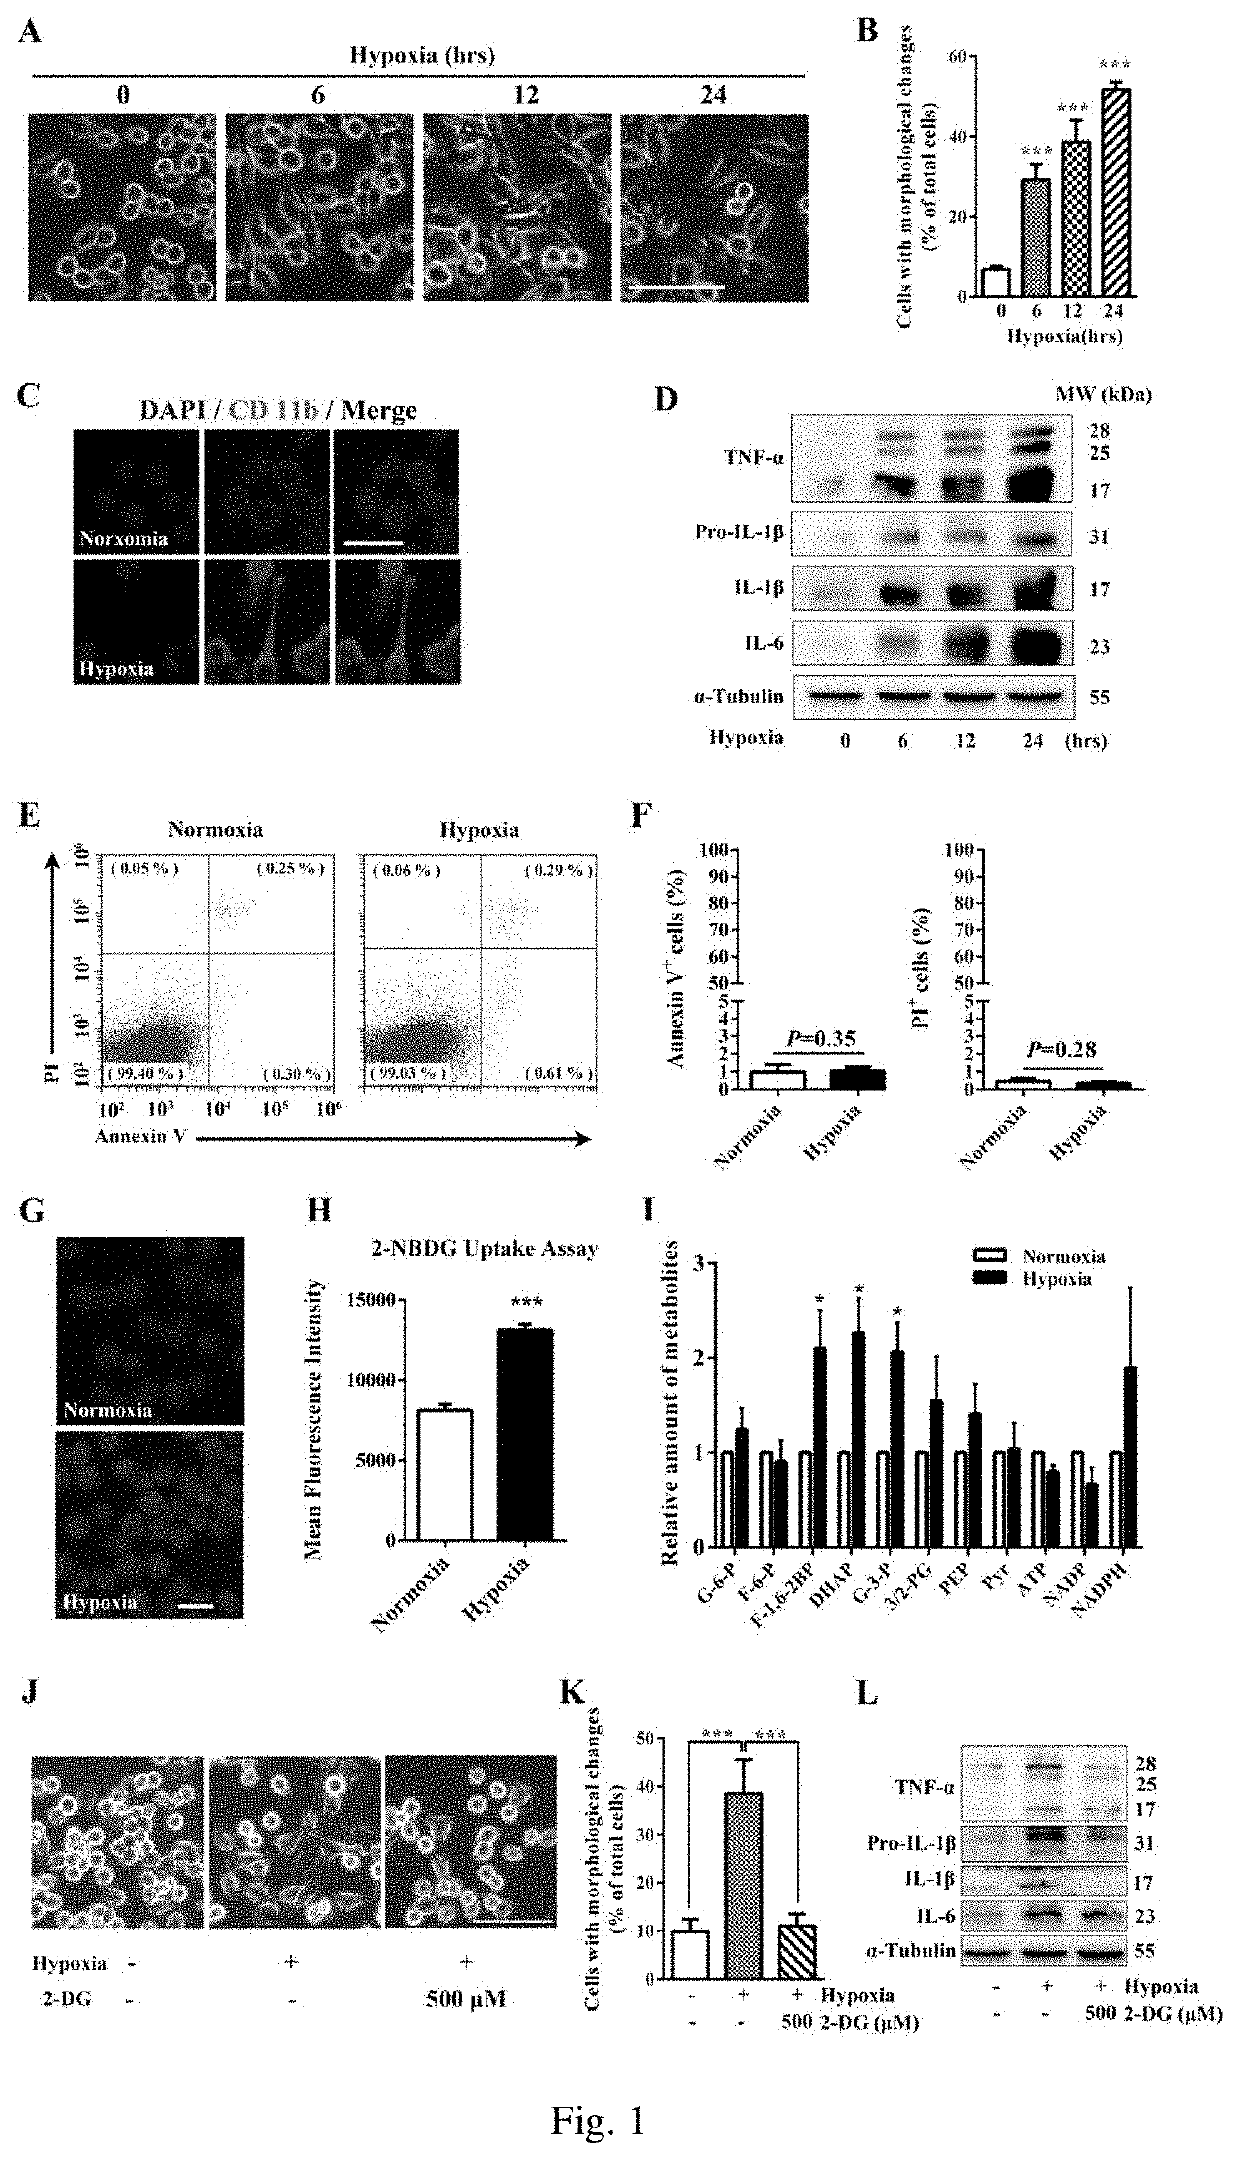 Hexokinase 2-specific inhibitor in acute central nervous system injury disease